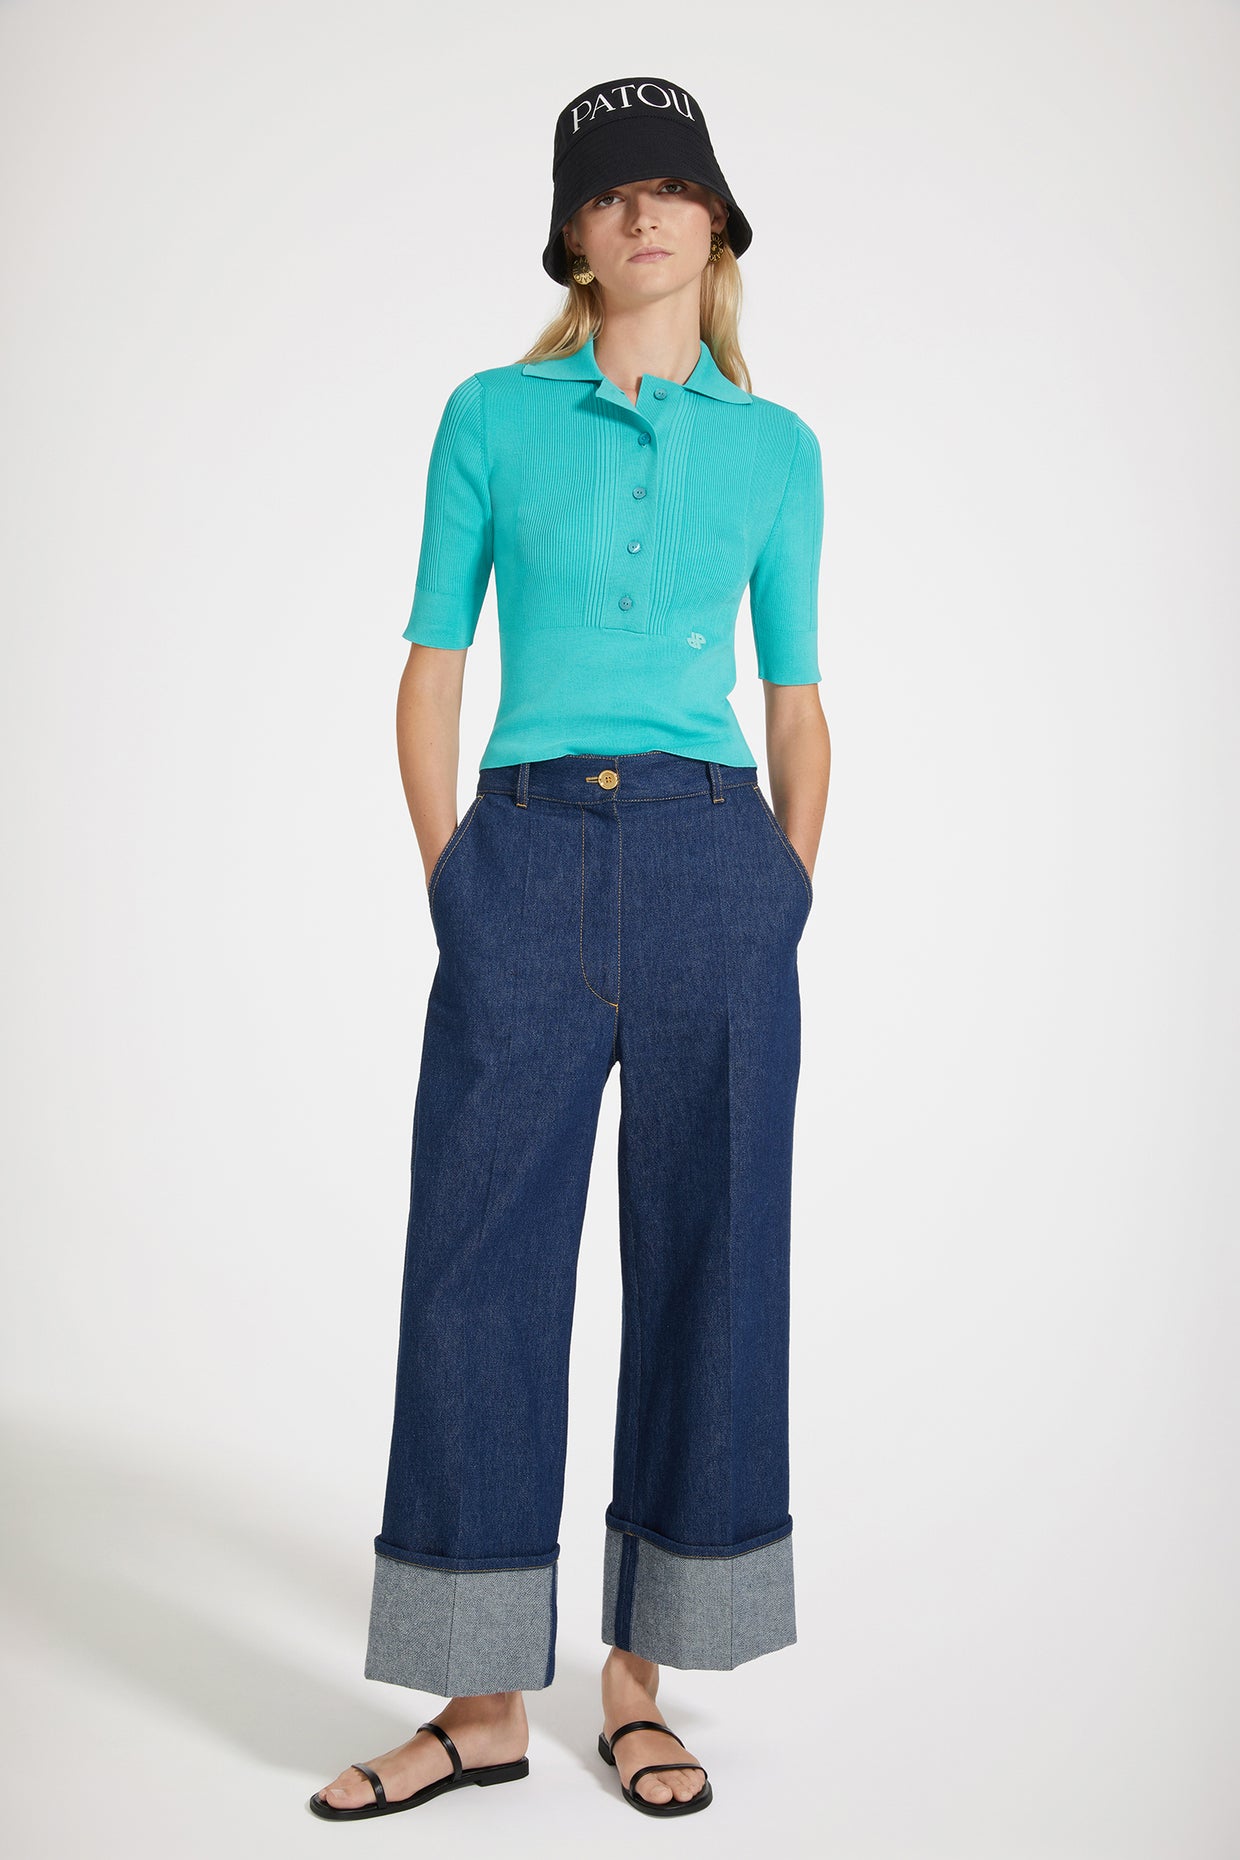 Patou  Trousers & skirts, quality & chic jeans for women 